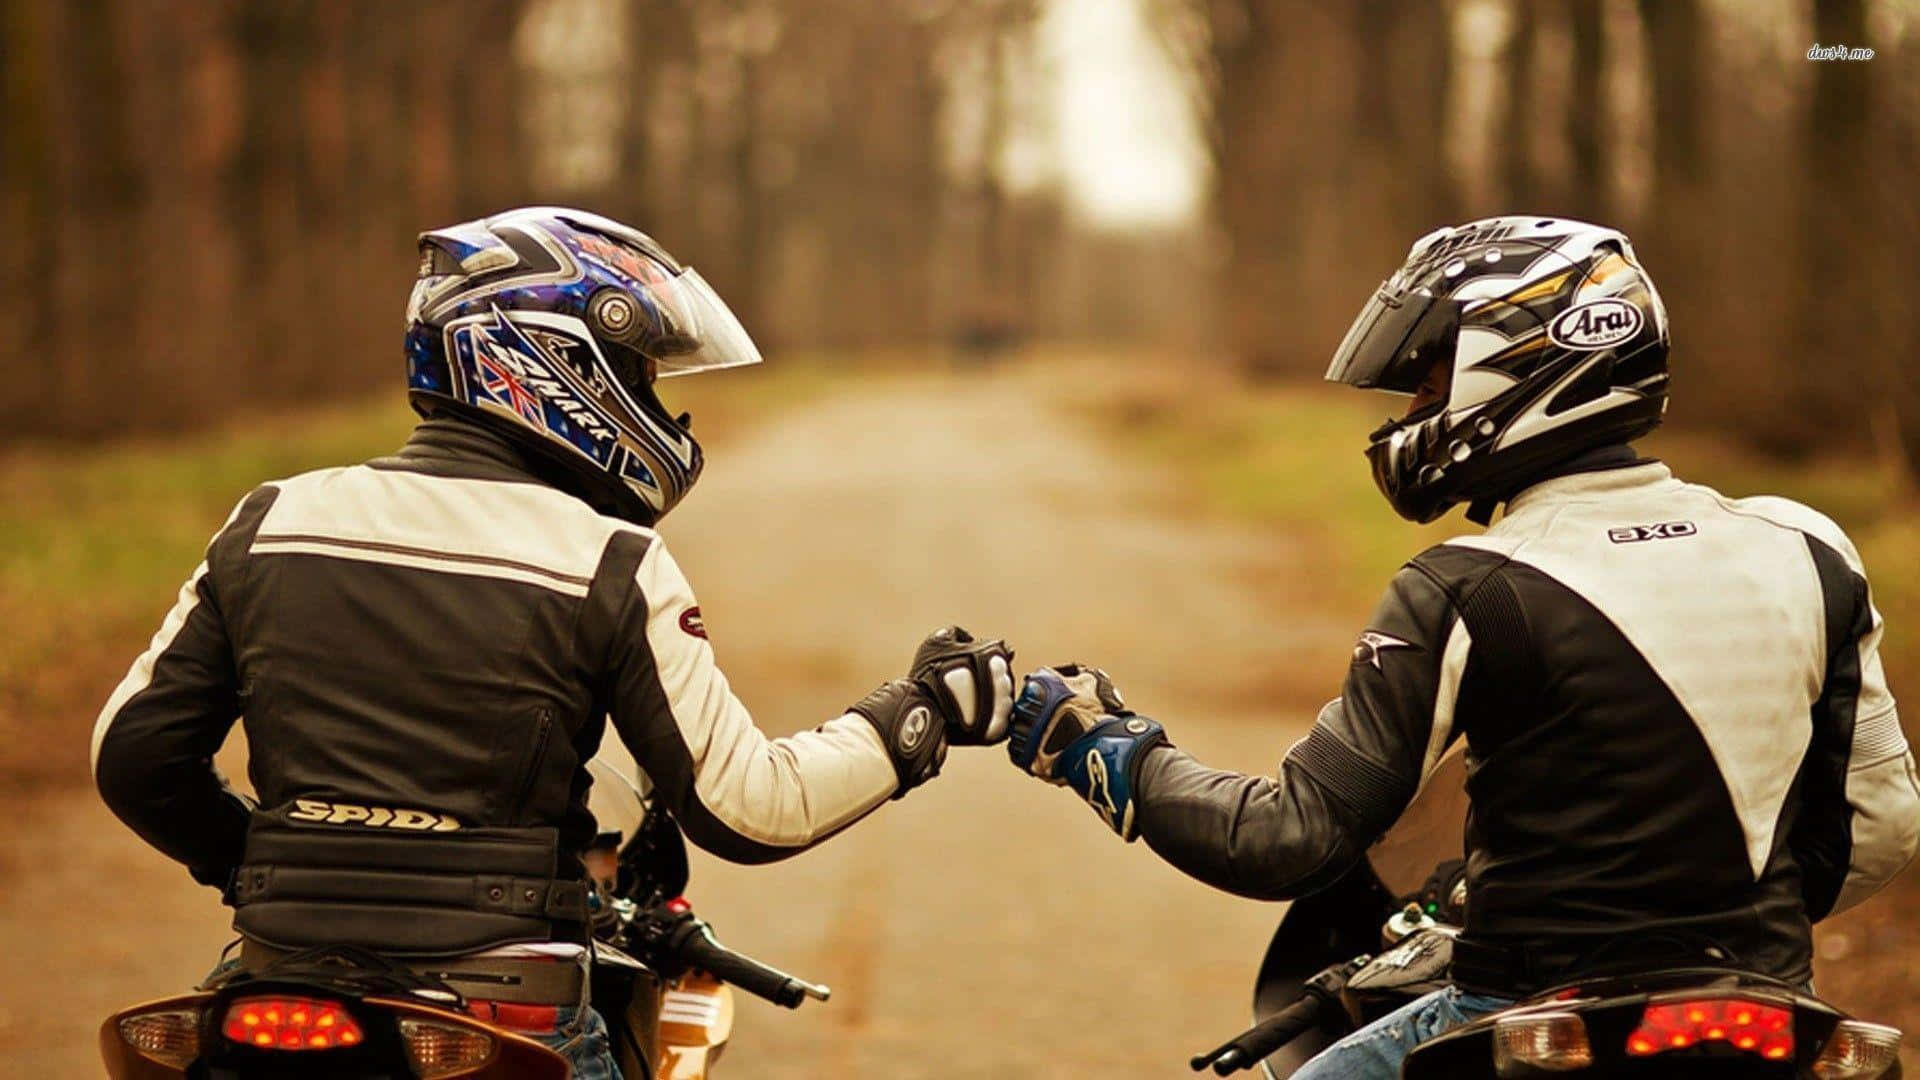 Fist Bumping Biker Pictures